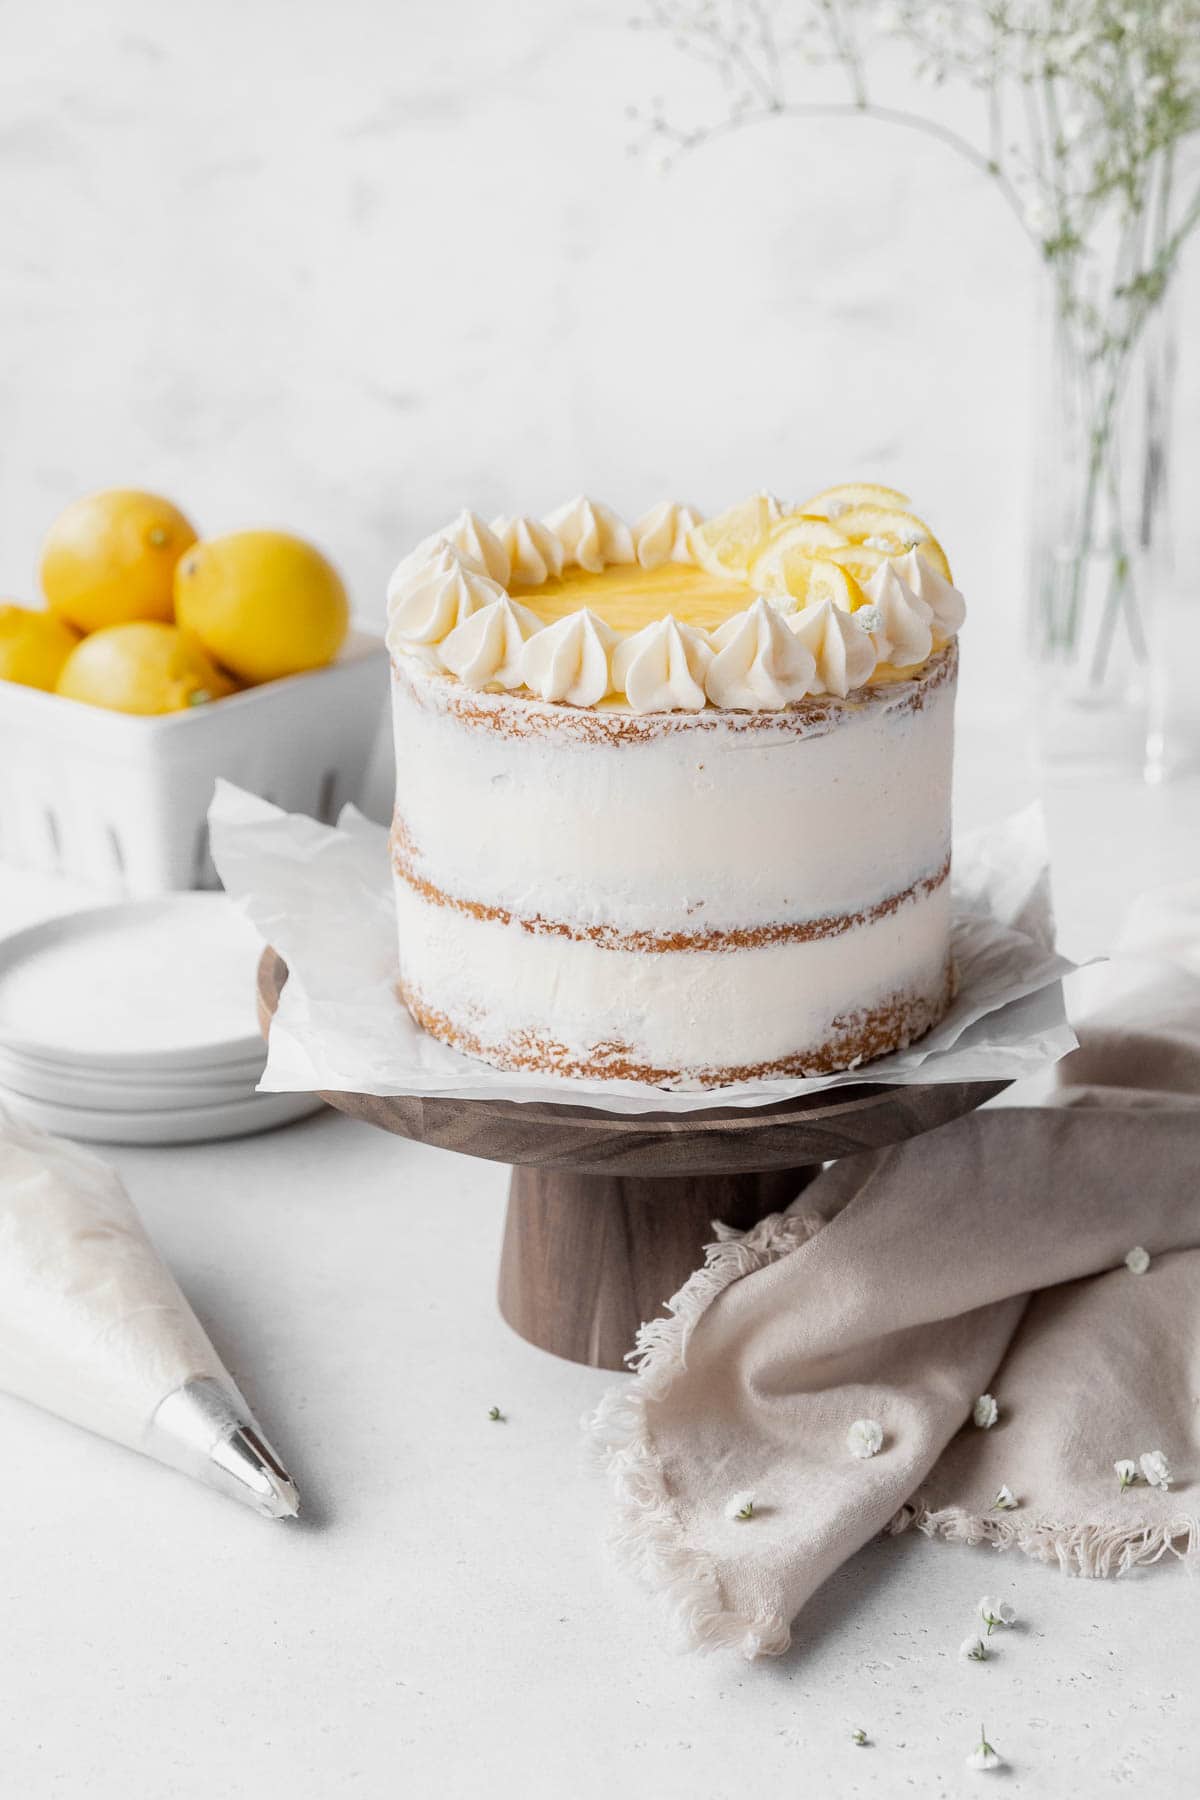 Final flourishes added to the dairy-free lemon curd cake including rosettes of lemon buttercream, a center topping of lemon curd, and candied lemons as decoration.